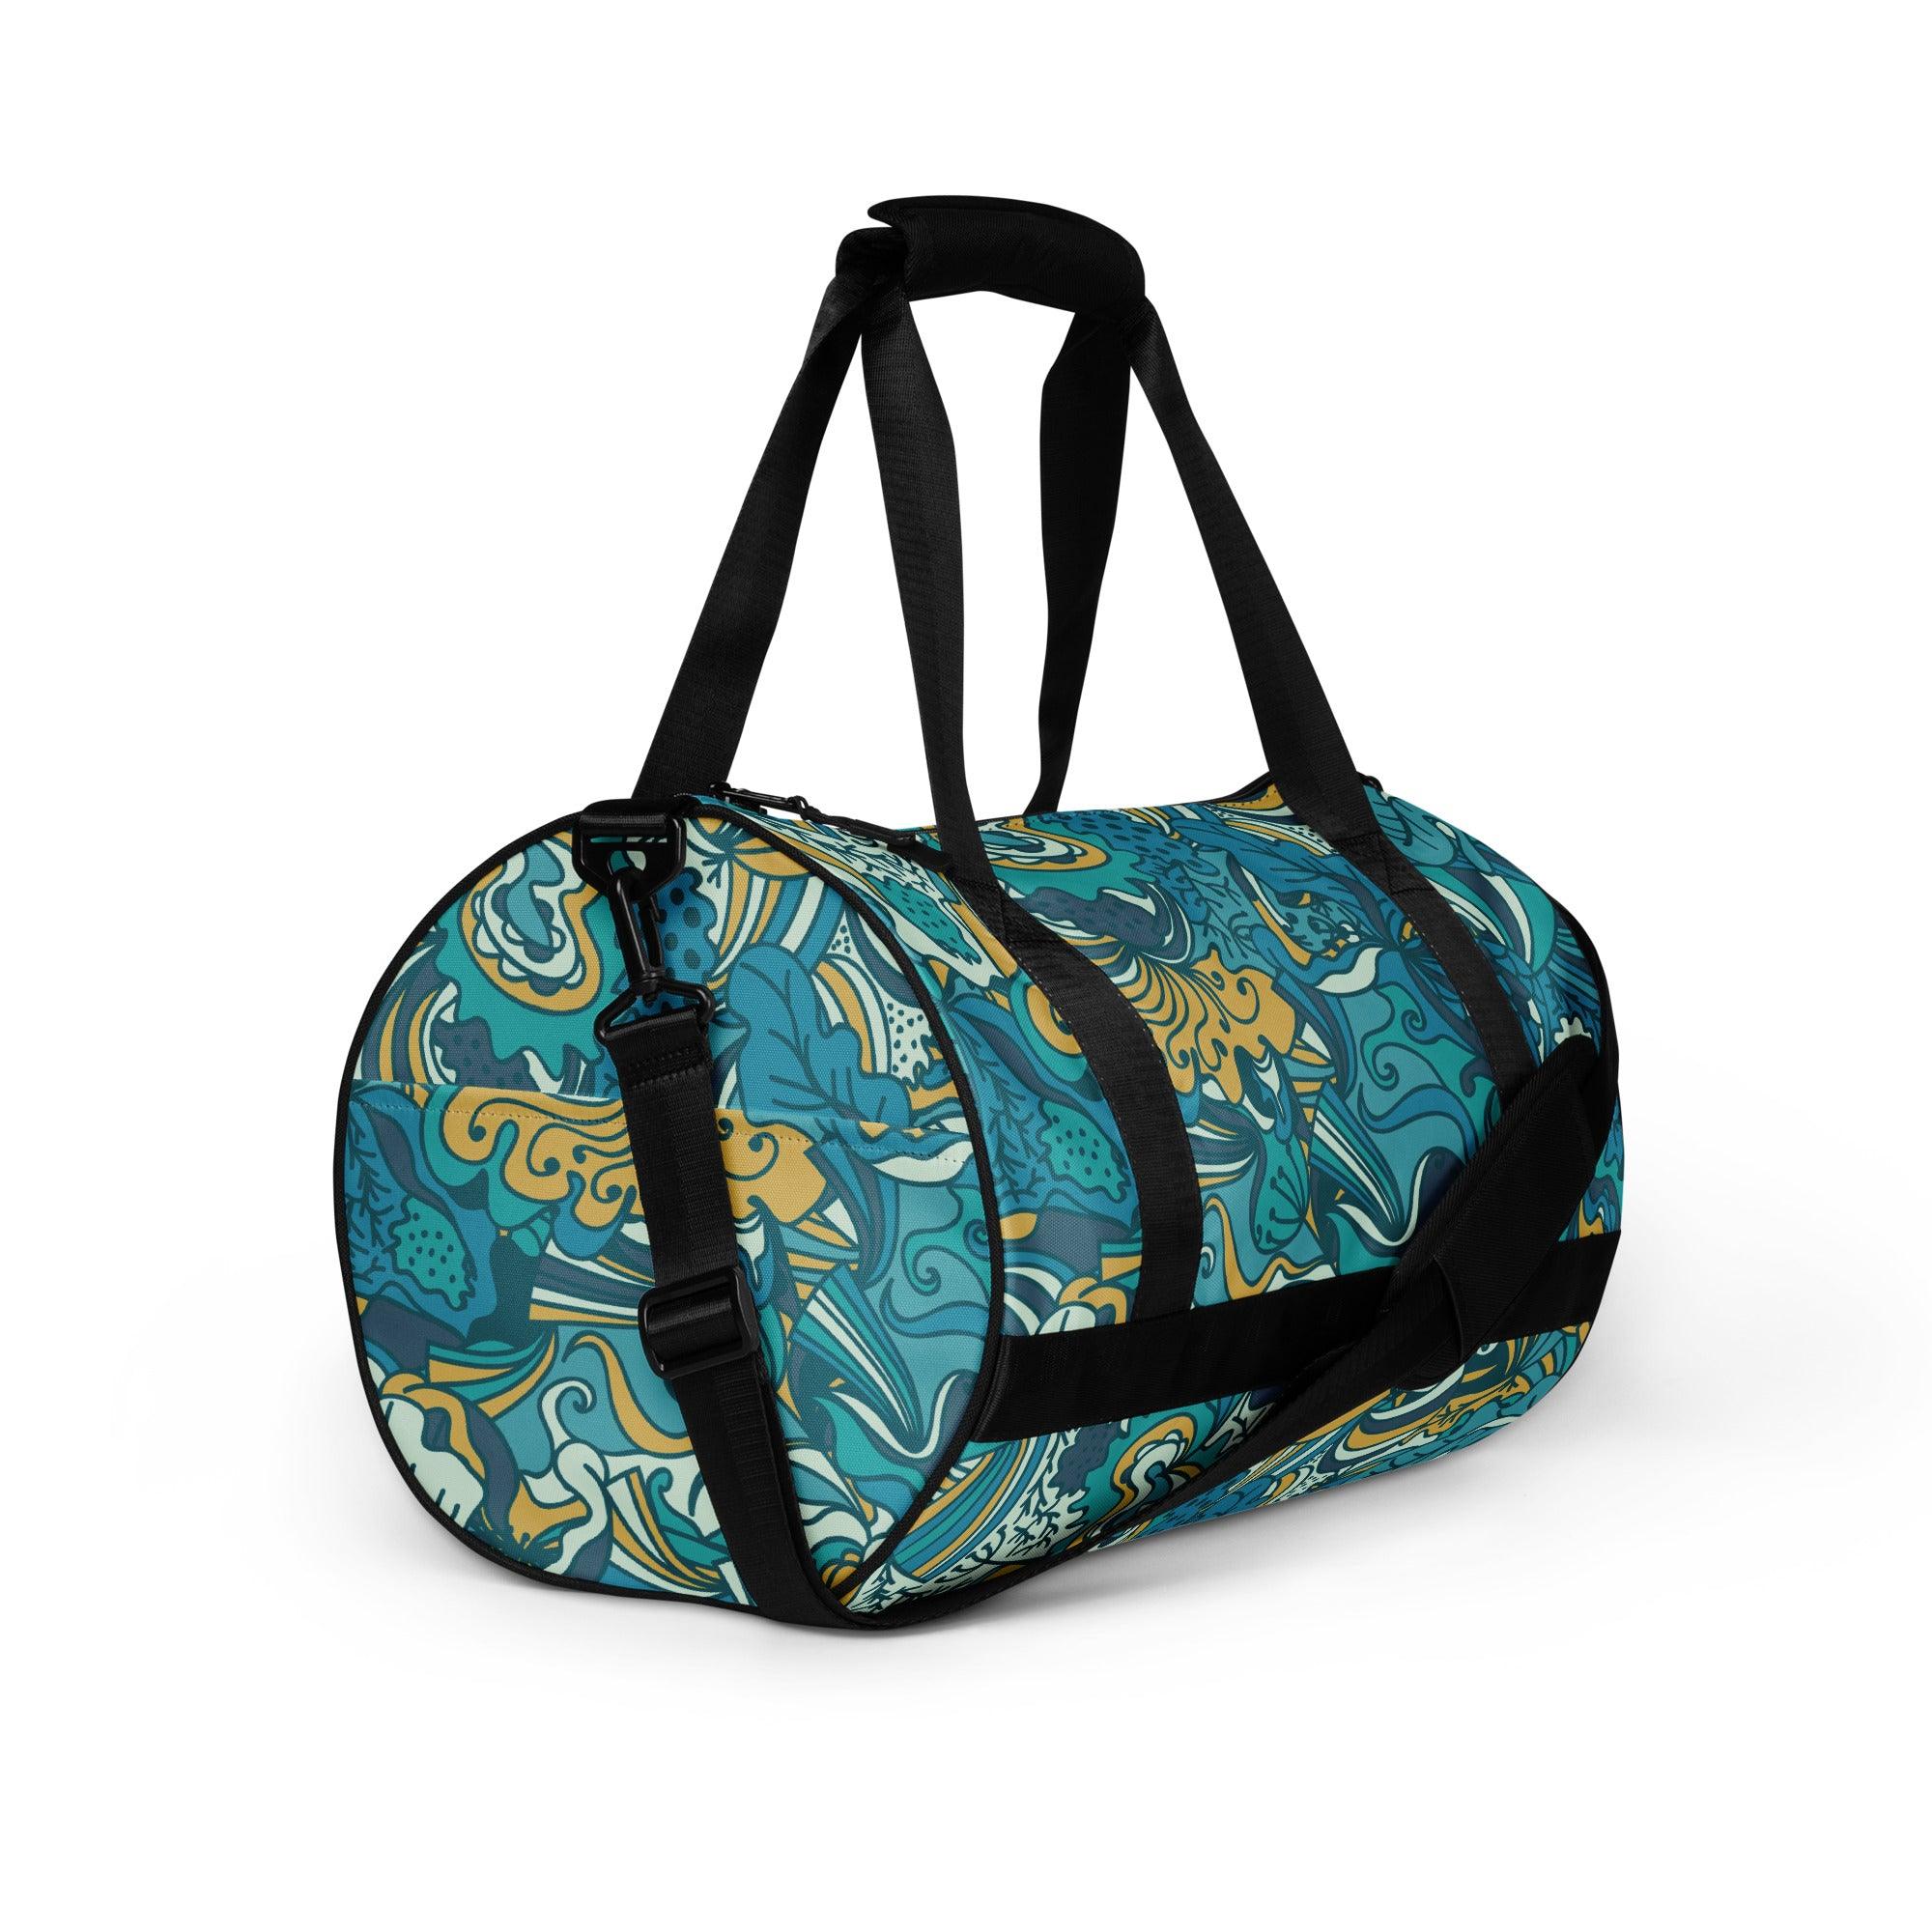 Masu Sport & Travel Duffle Bag - Abstract Pastel Floral All Over Psychedelic Print - Blue | Green